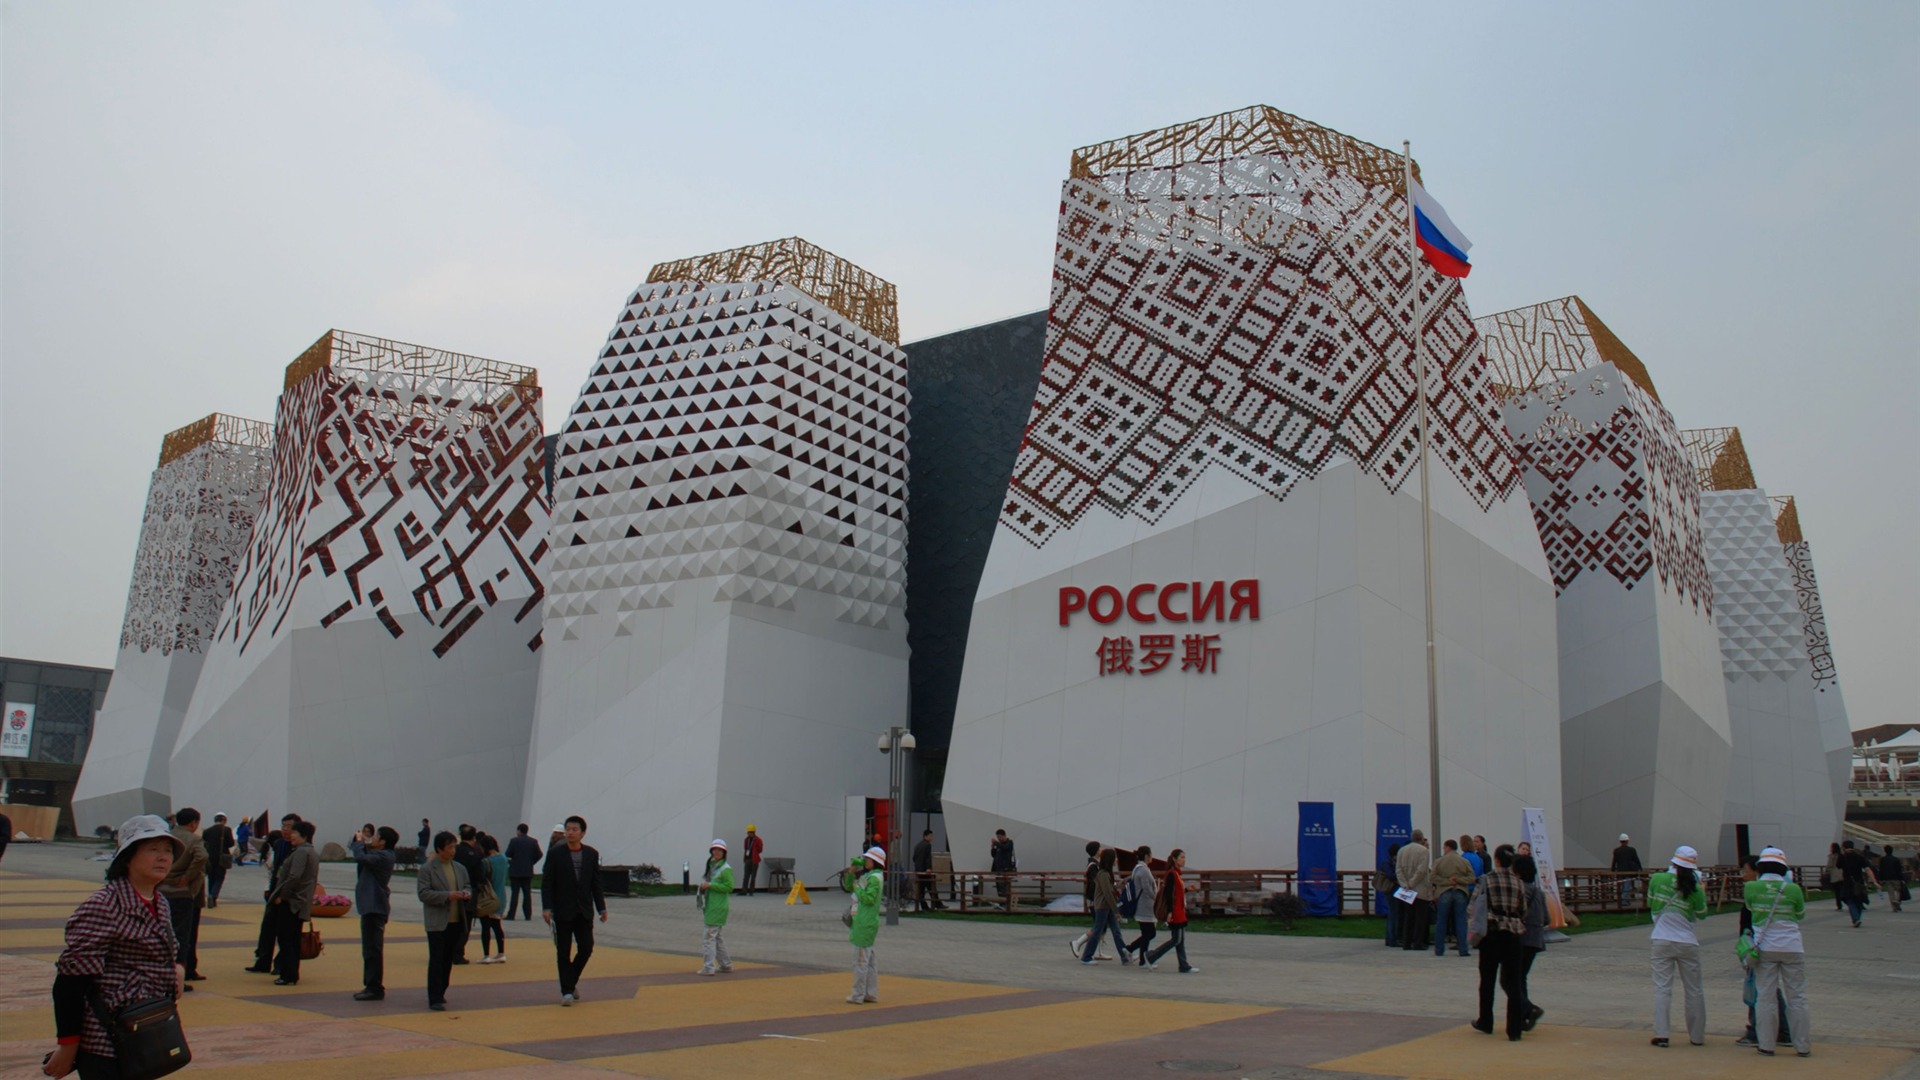 Commissioning of the 2010 Shanghai World Expo (studious works) #20 - 1920x1080